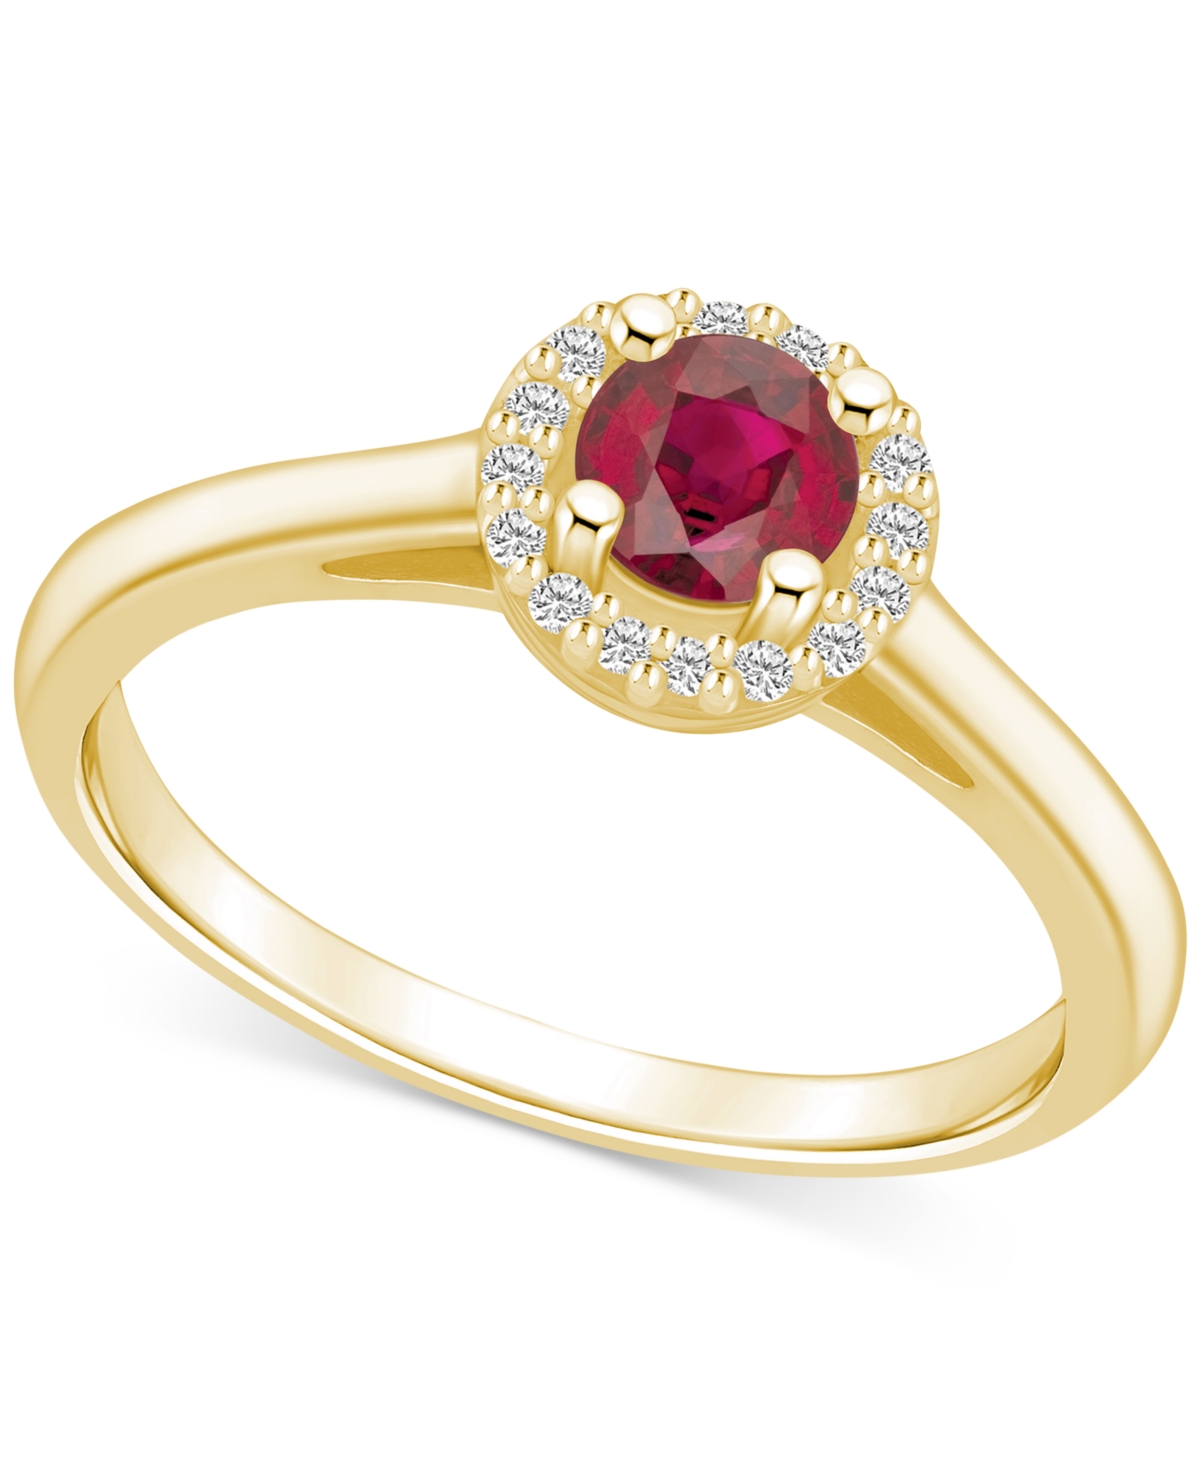 MACY'S EMERALD (1/2 CT. T.W.) & DIAMOND (1/10 CT. T.W.) HALO RING IN 14K GOLD (ALSO IN RUBY, SAPPHIRE, & PI